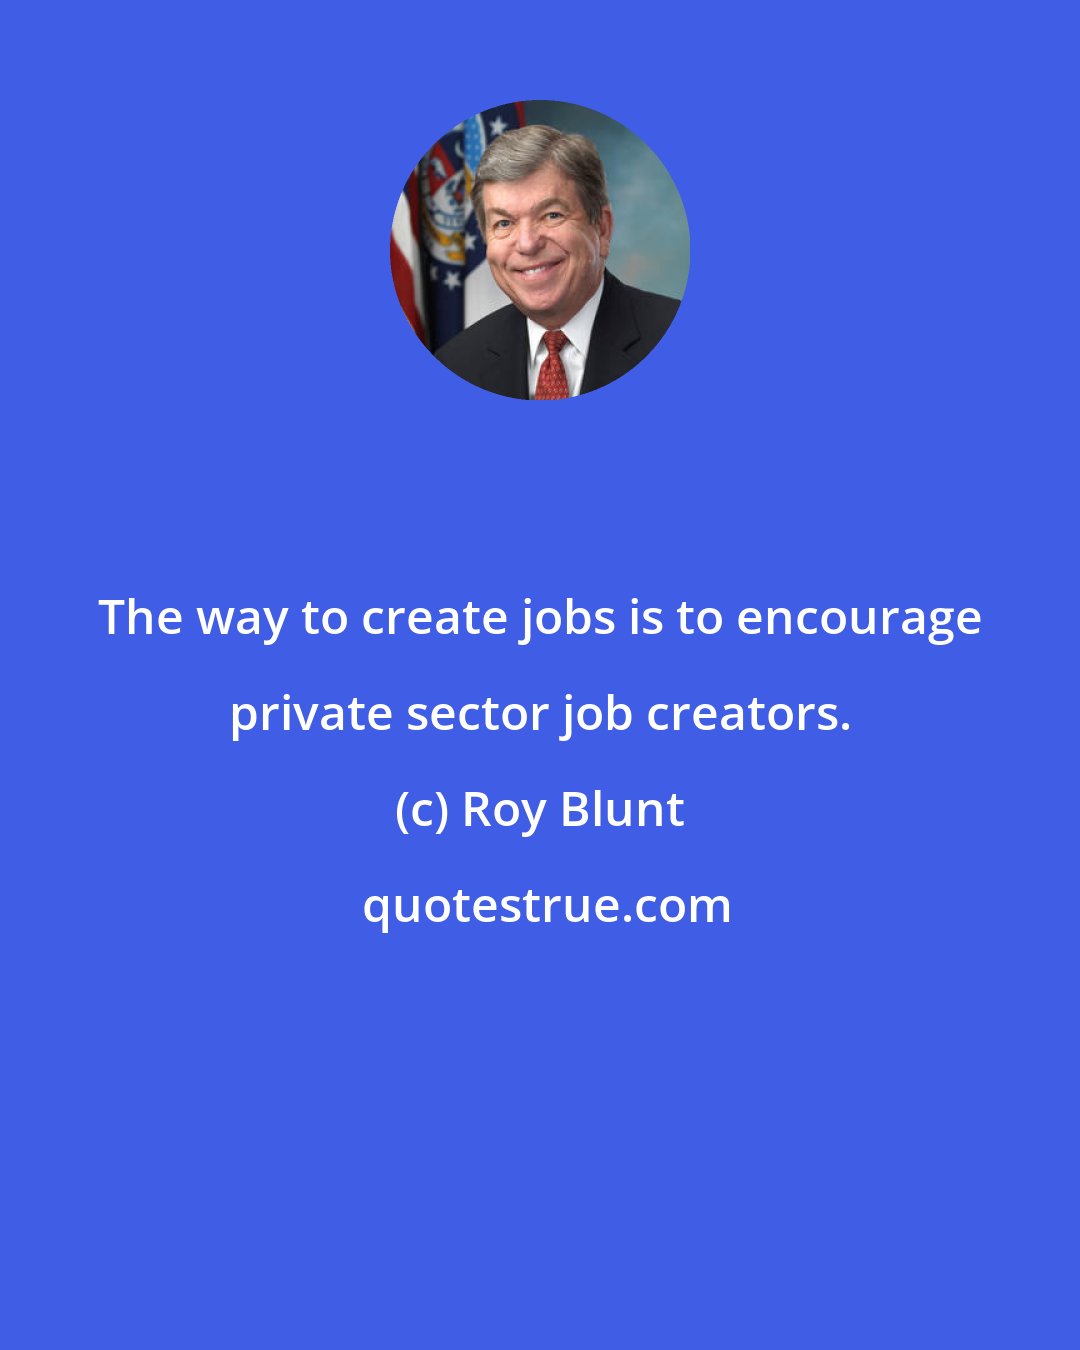 Roy Blunt: The way to create jobs is to encourage private sector job creators.